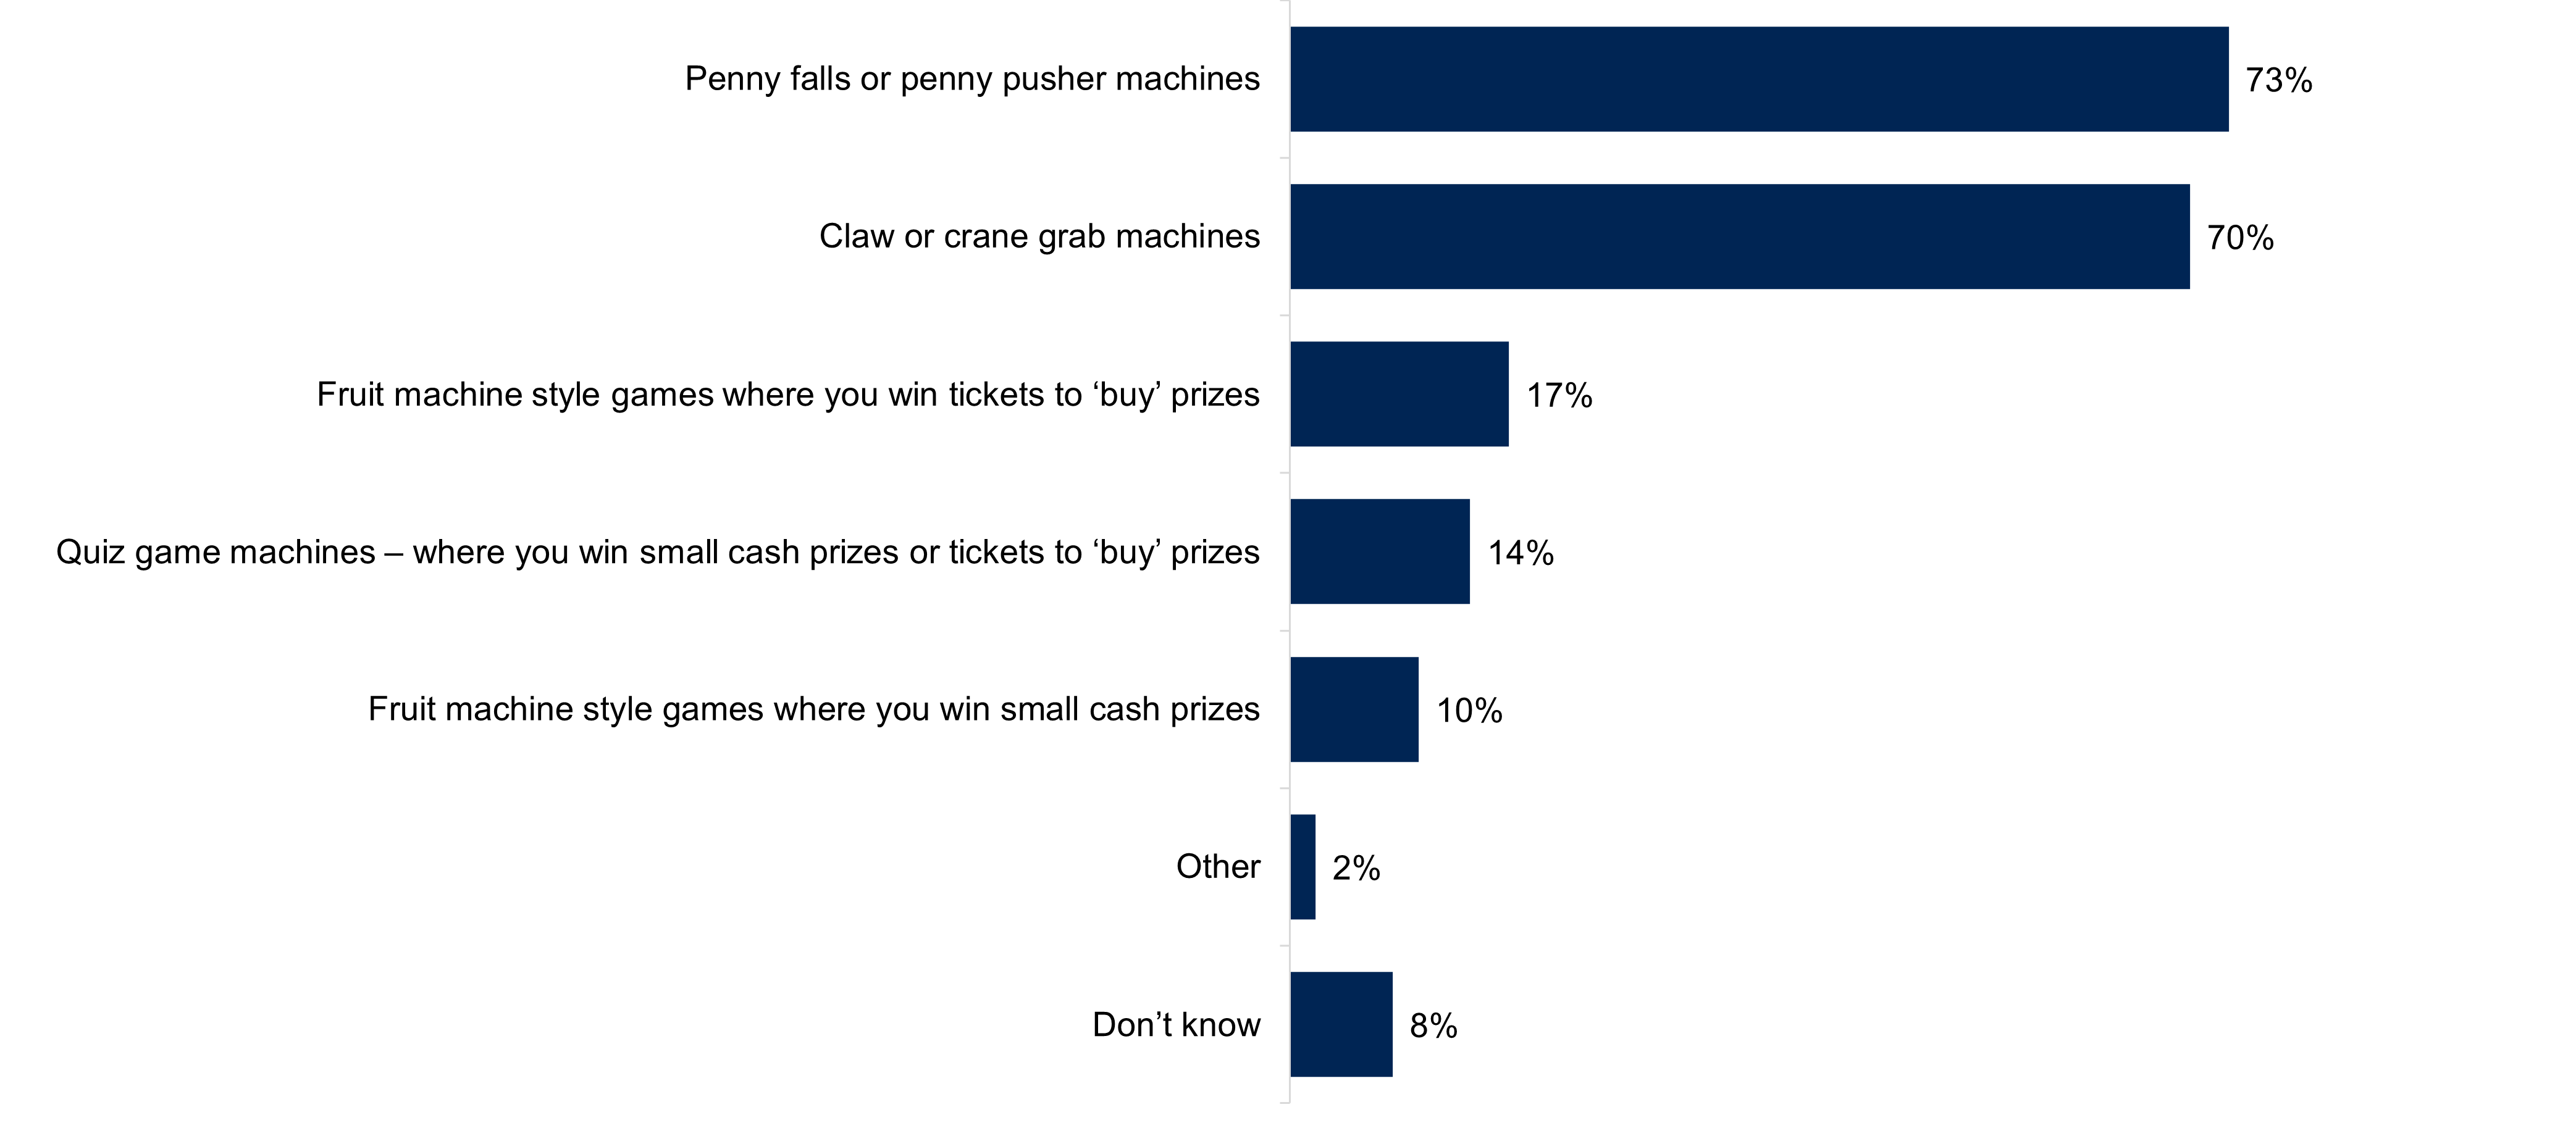 A bar chart showing the types of gaming machines played by young people, from 'Penny falls or penny pusher machines' to 'Fruit machine style games where you win small cash prizes'. Data from the chart is provided within the following table.